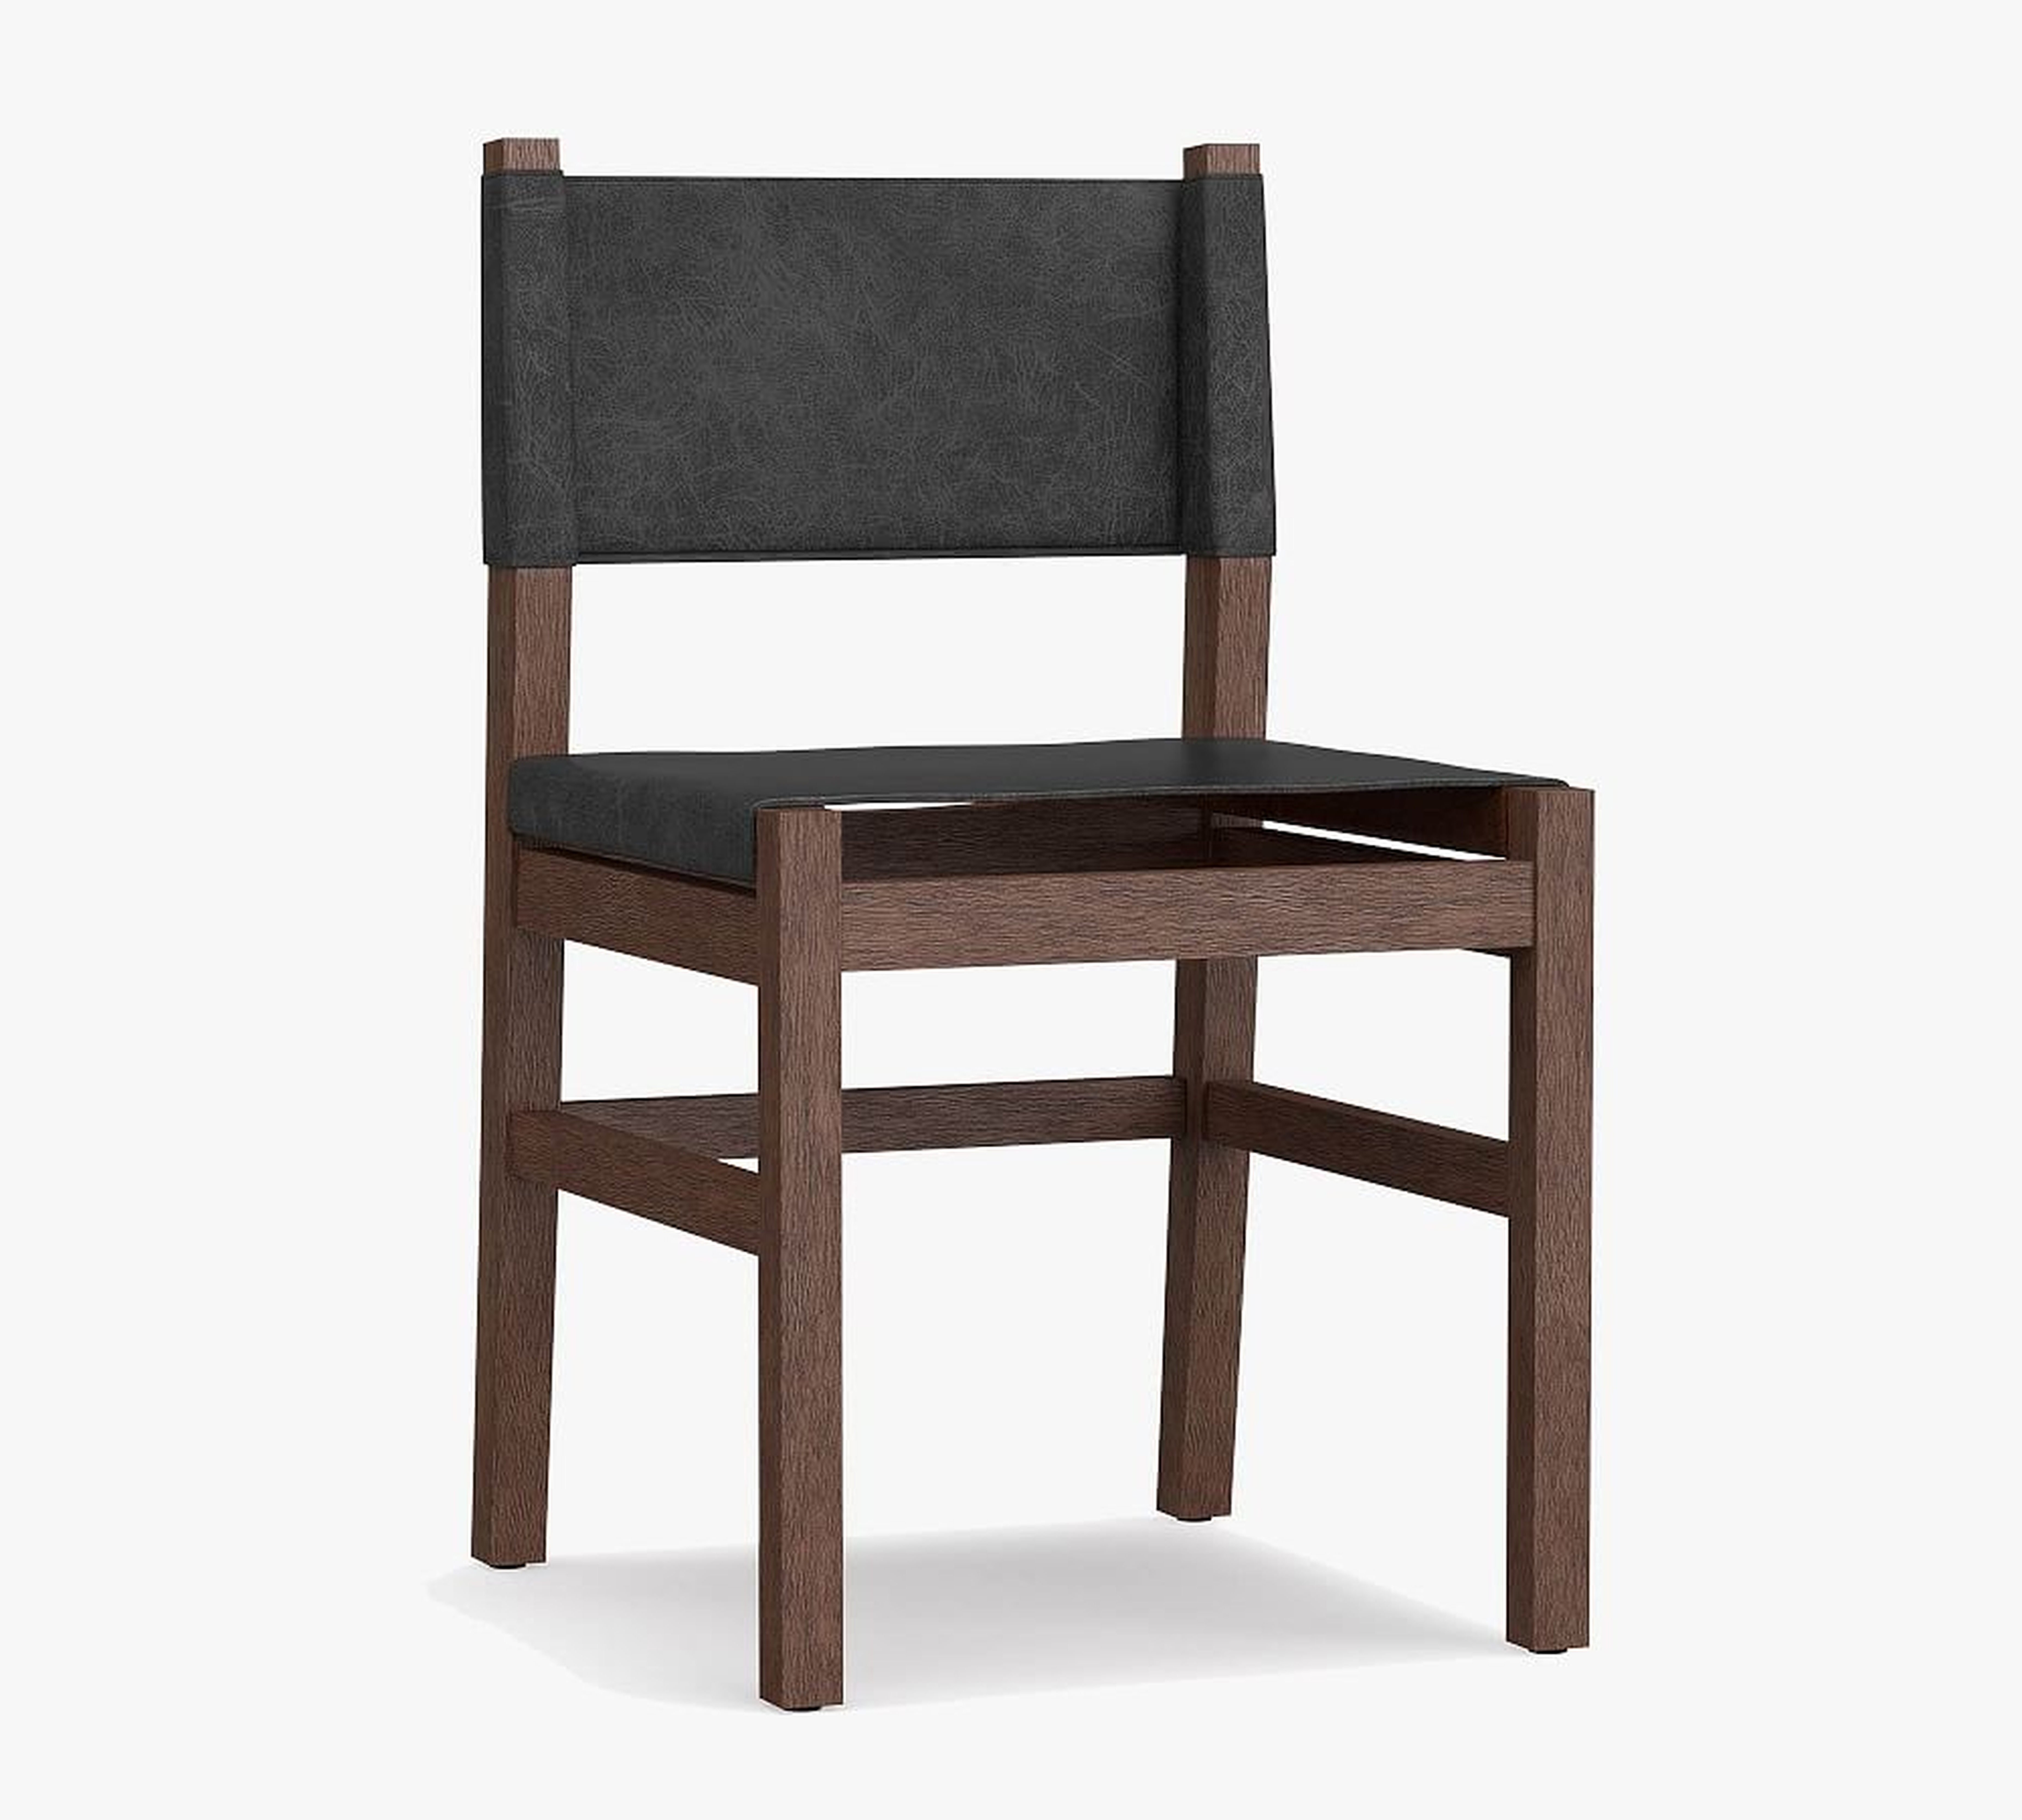 Segura Leather Dining Side Chair, Coffee Bean Frame, Black - Pottery Barn